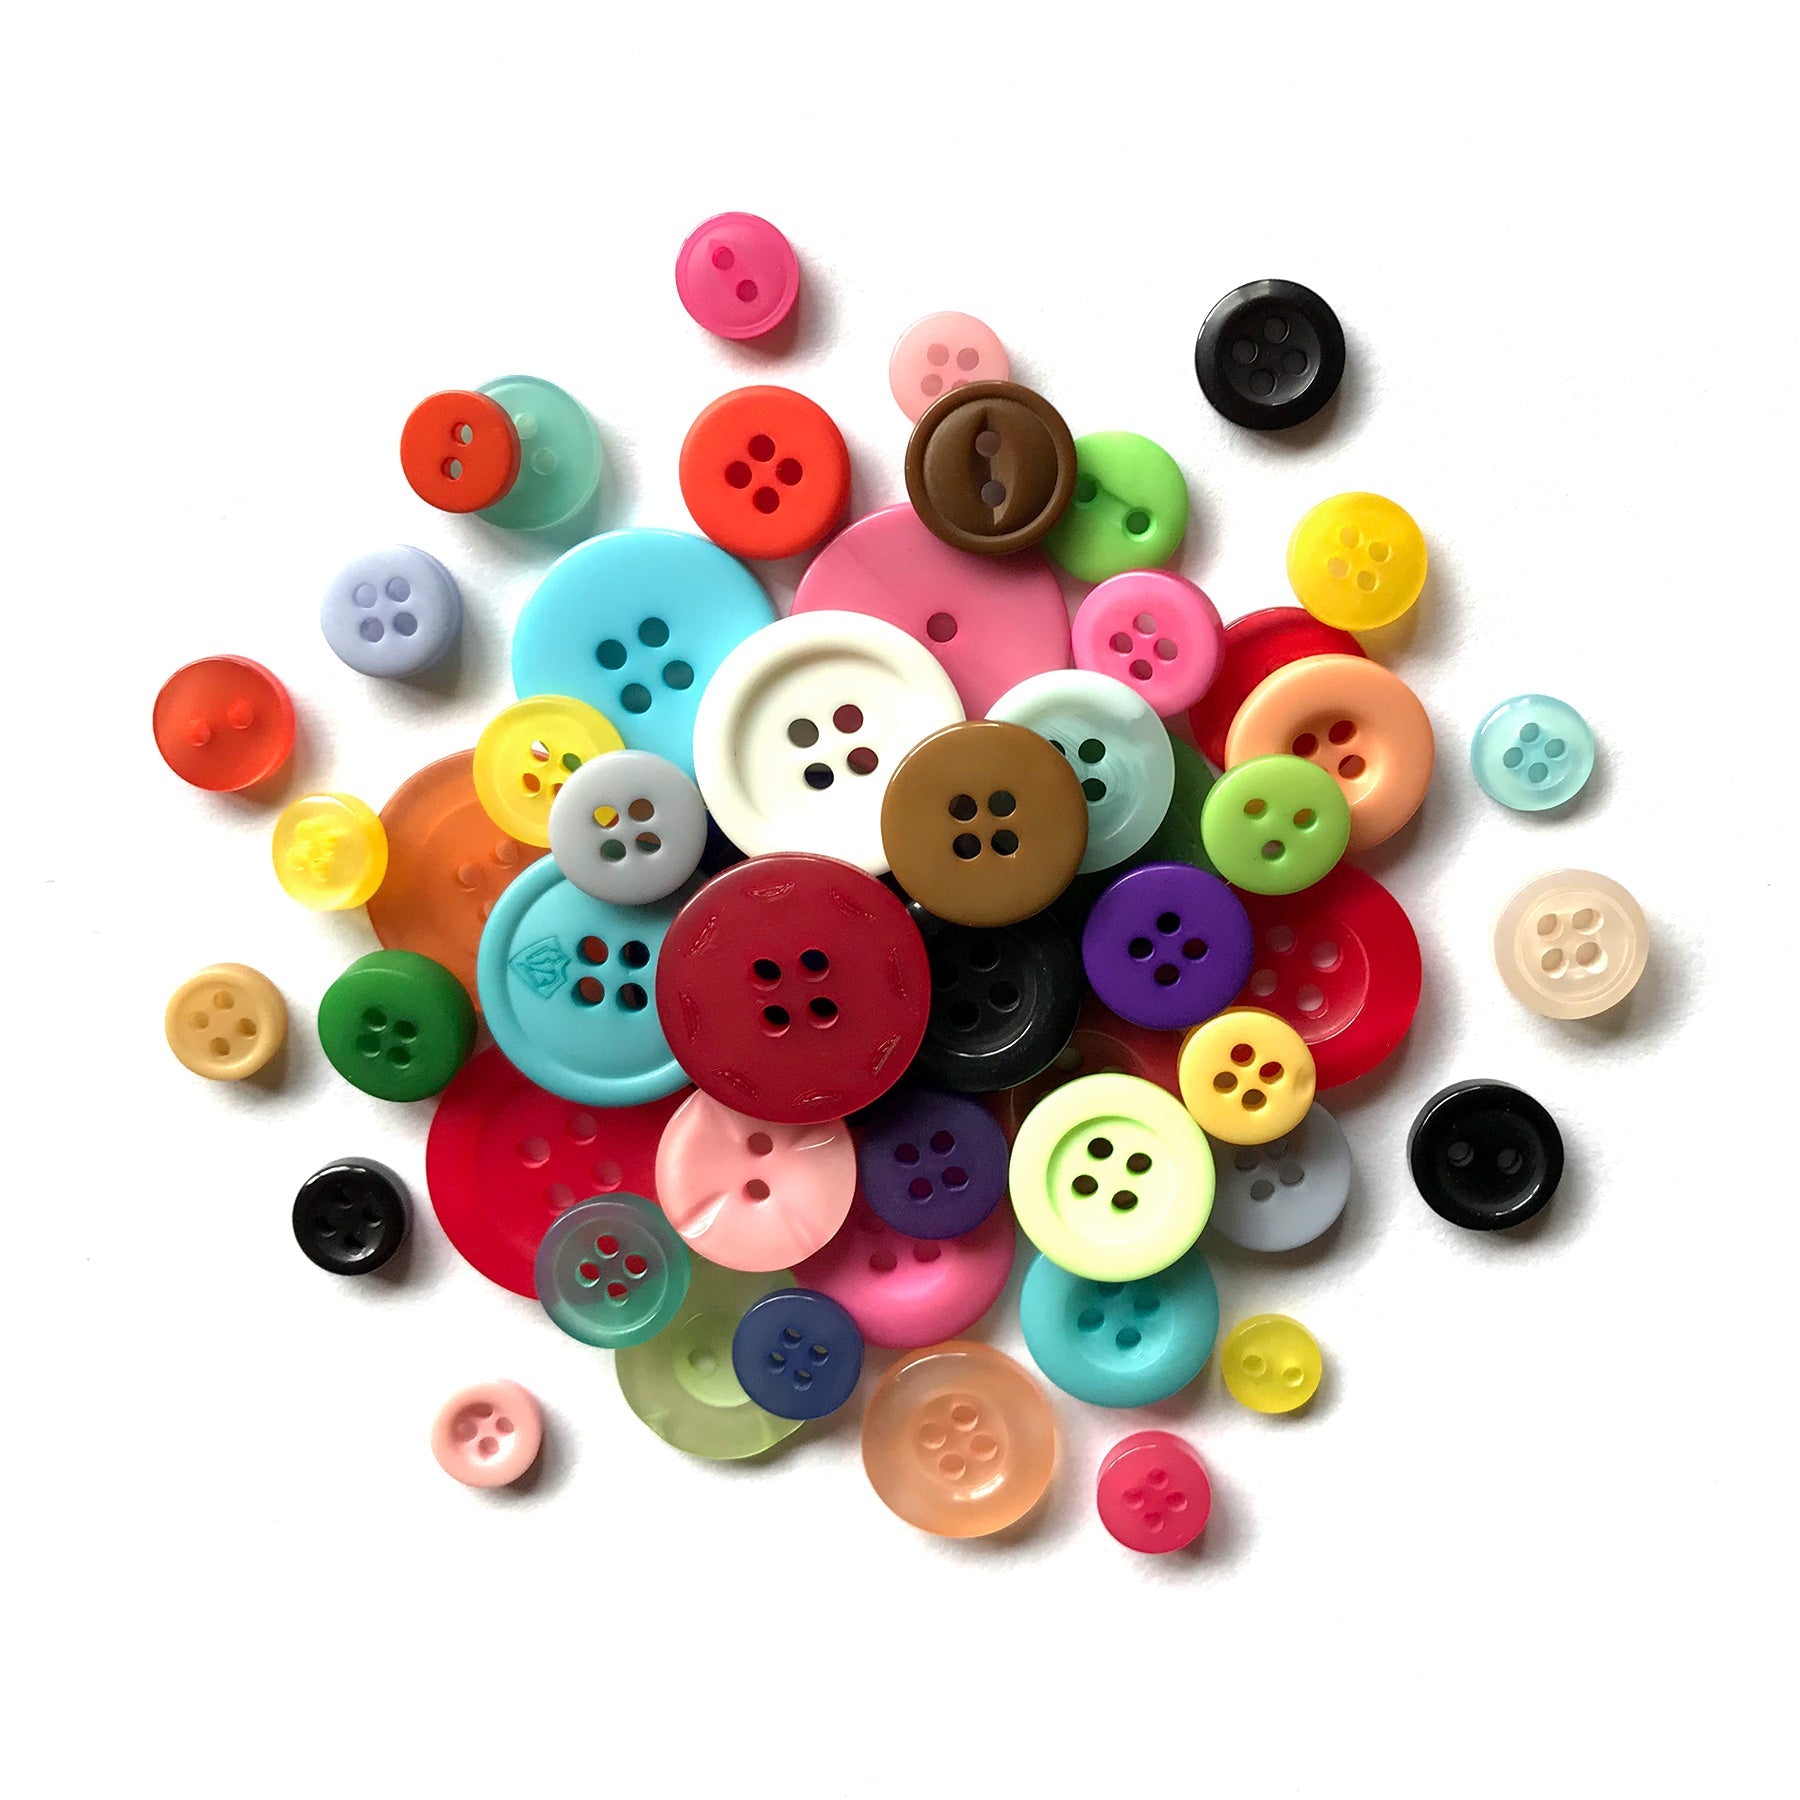 100 Clear Buttons, Clear Red Buttons, Assorted sizes Buttons, Grab Bag,  Sewing, Crafting, Jewelry, Collect (AL 35)